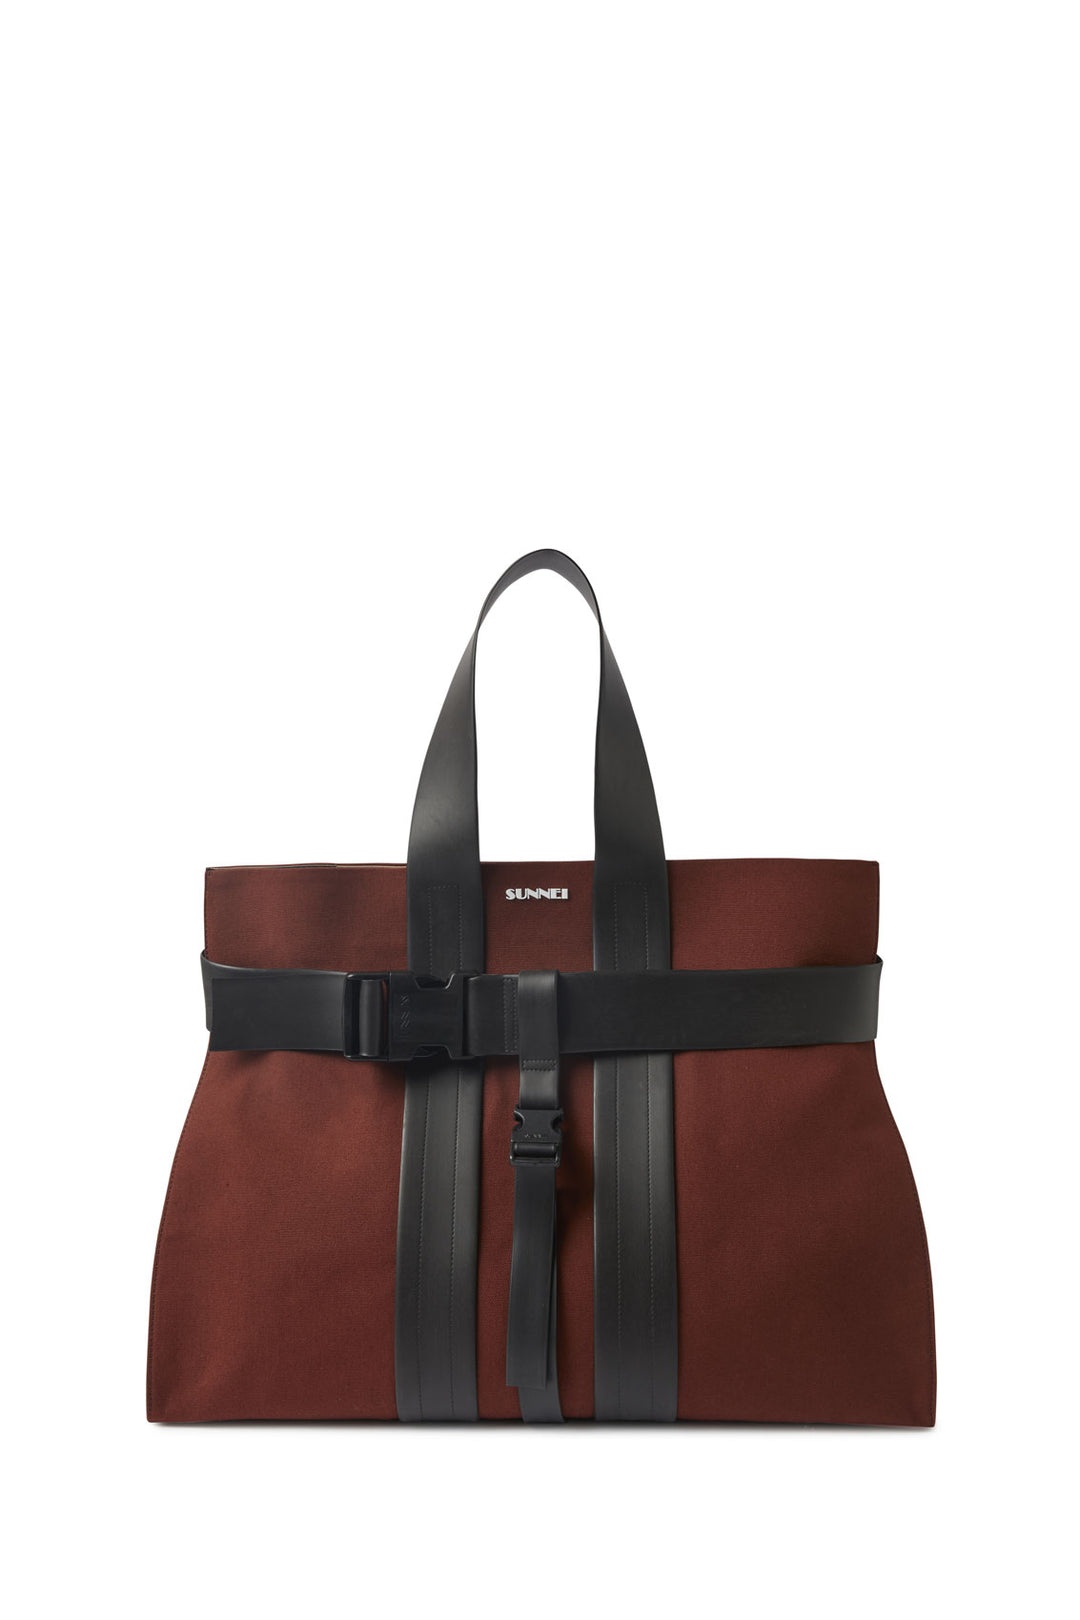 PARALLELEPIPEDO MESSENGER BAG / red wine - 1